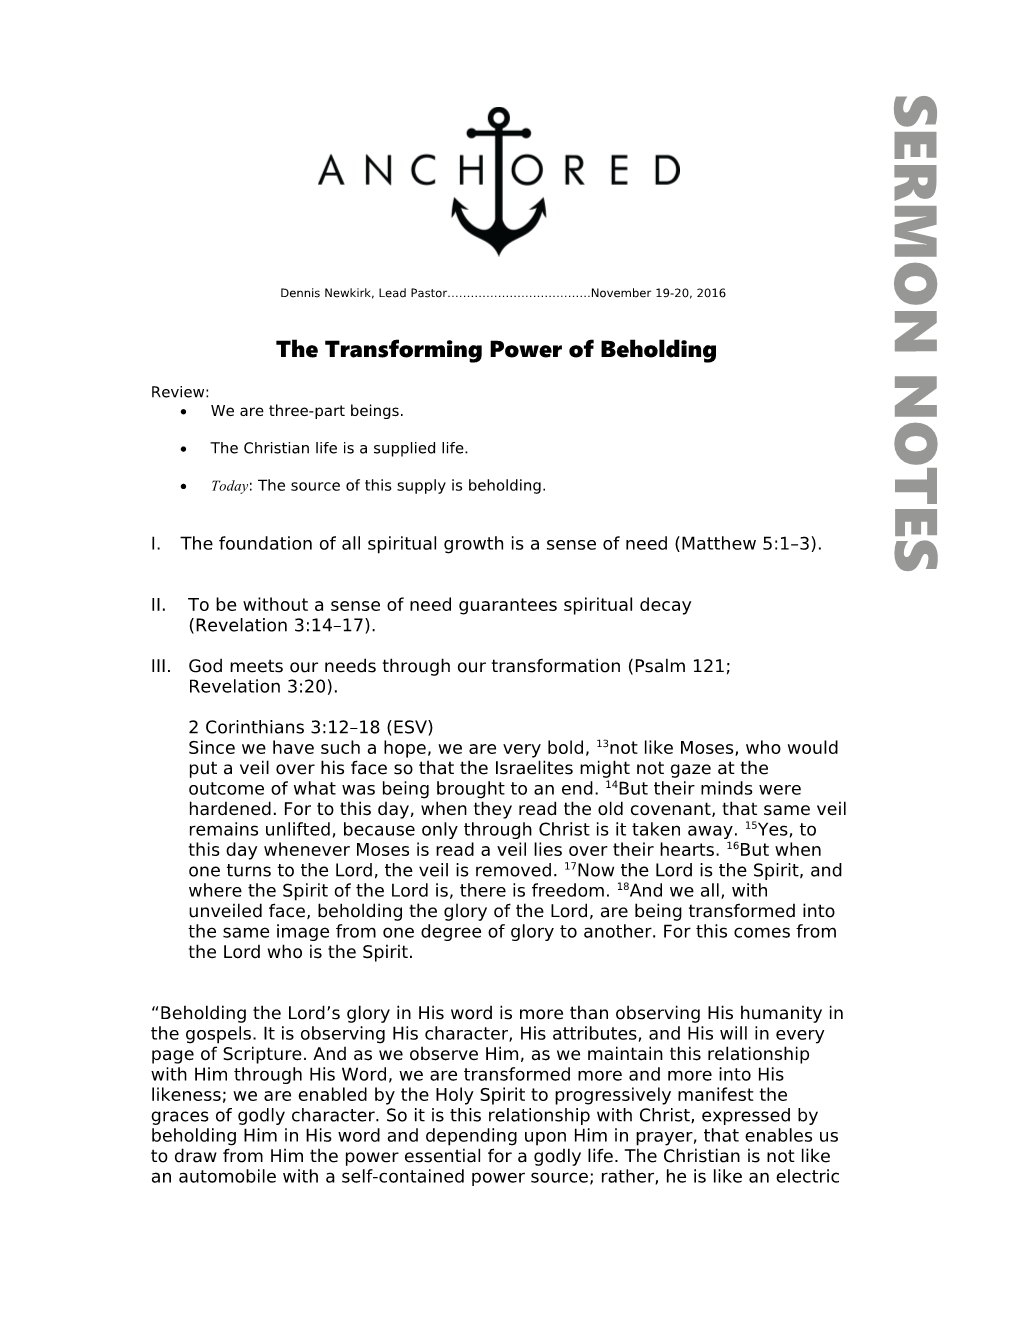 The Transforming Power of Beholding